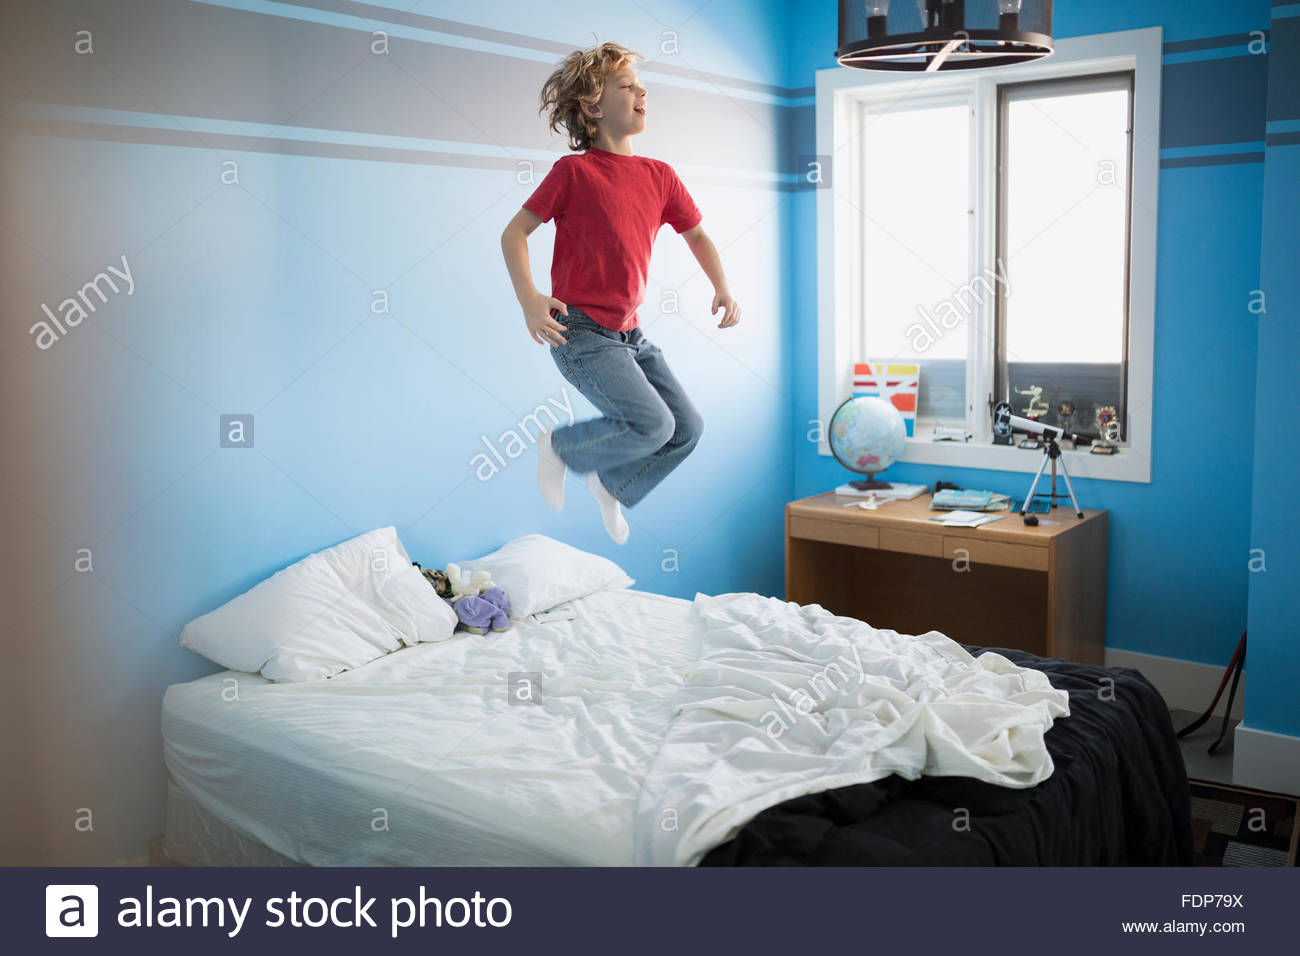 Boy jumping on bed Banque D'Images